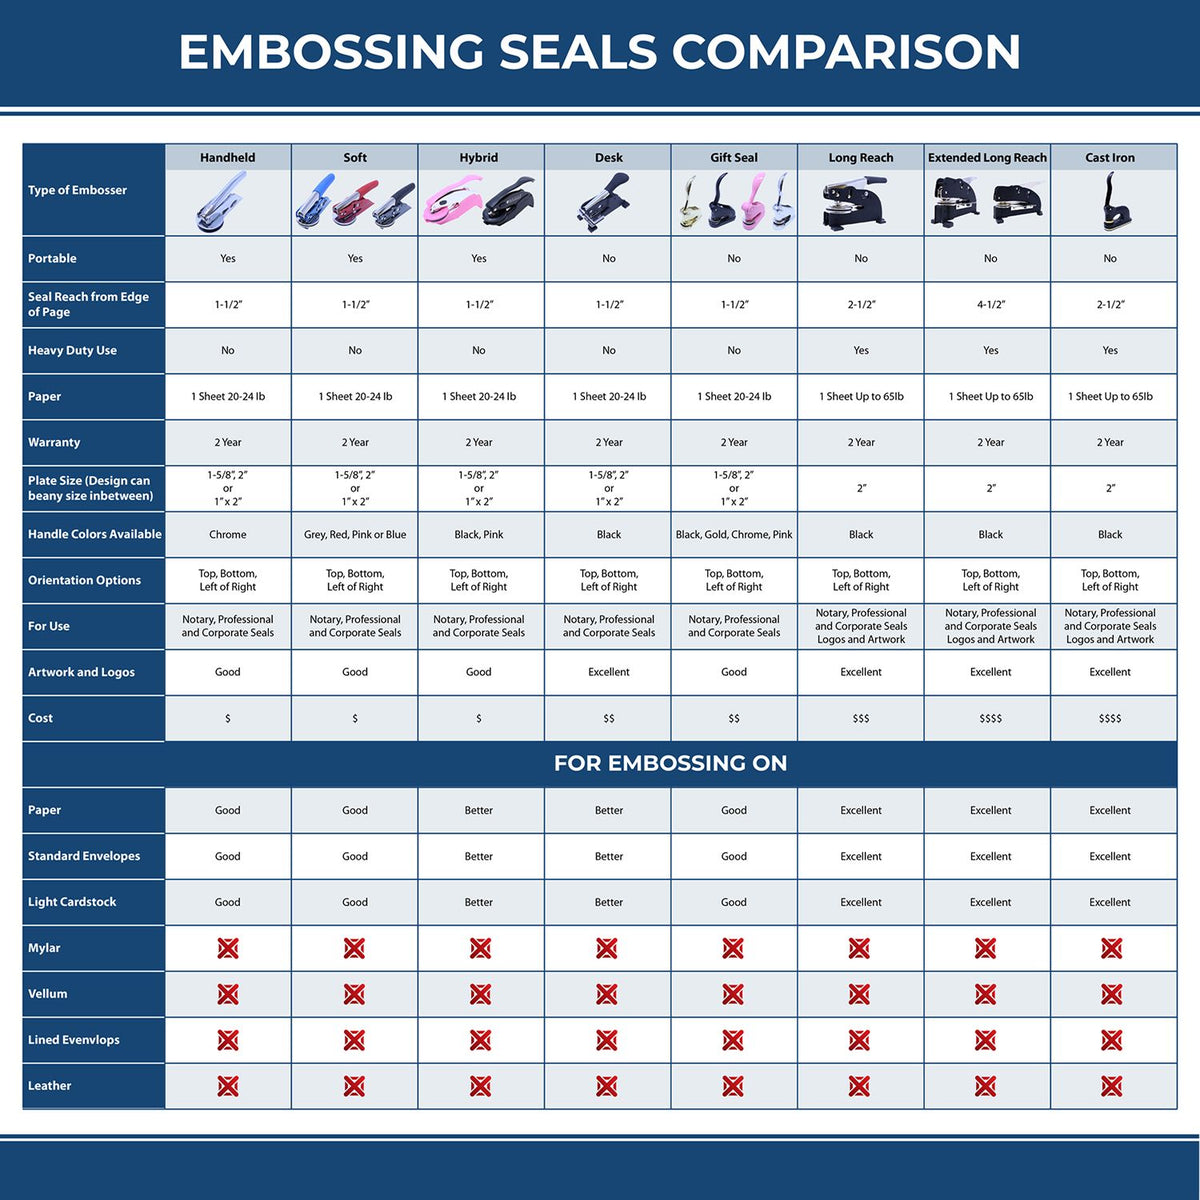 A comparison chart for the different types of mount models available for the State of Indiana Long Reach Architectural Embossing Seal.